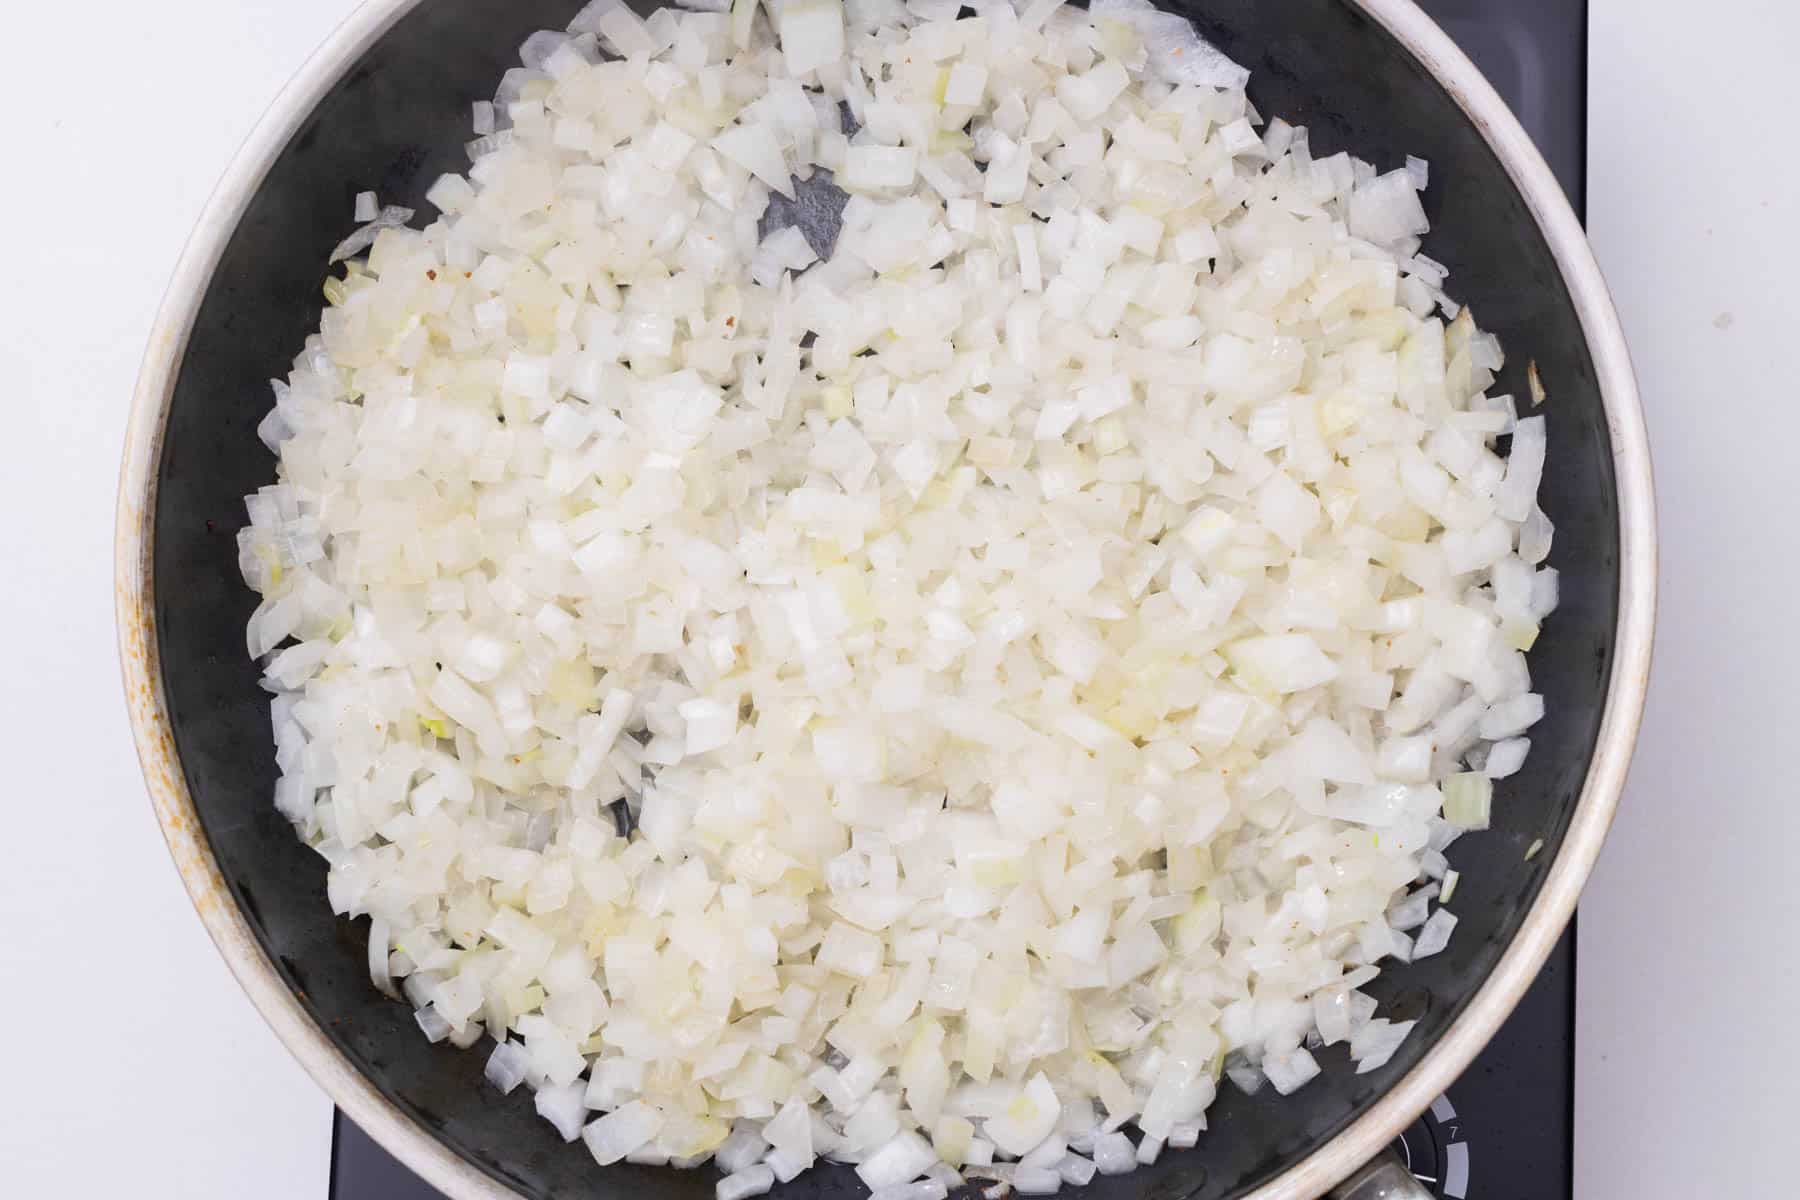 Diced onoins are added to a skillet.